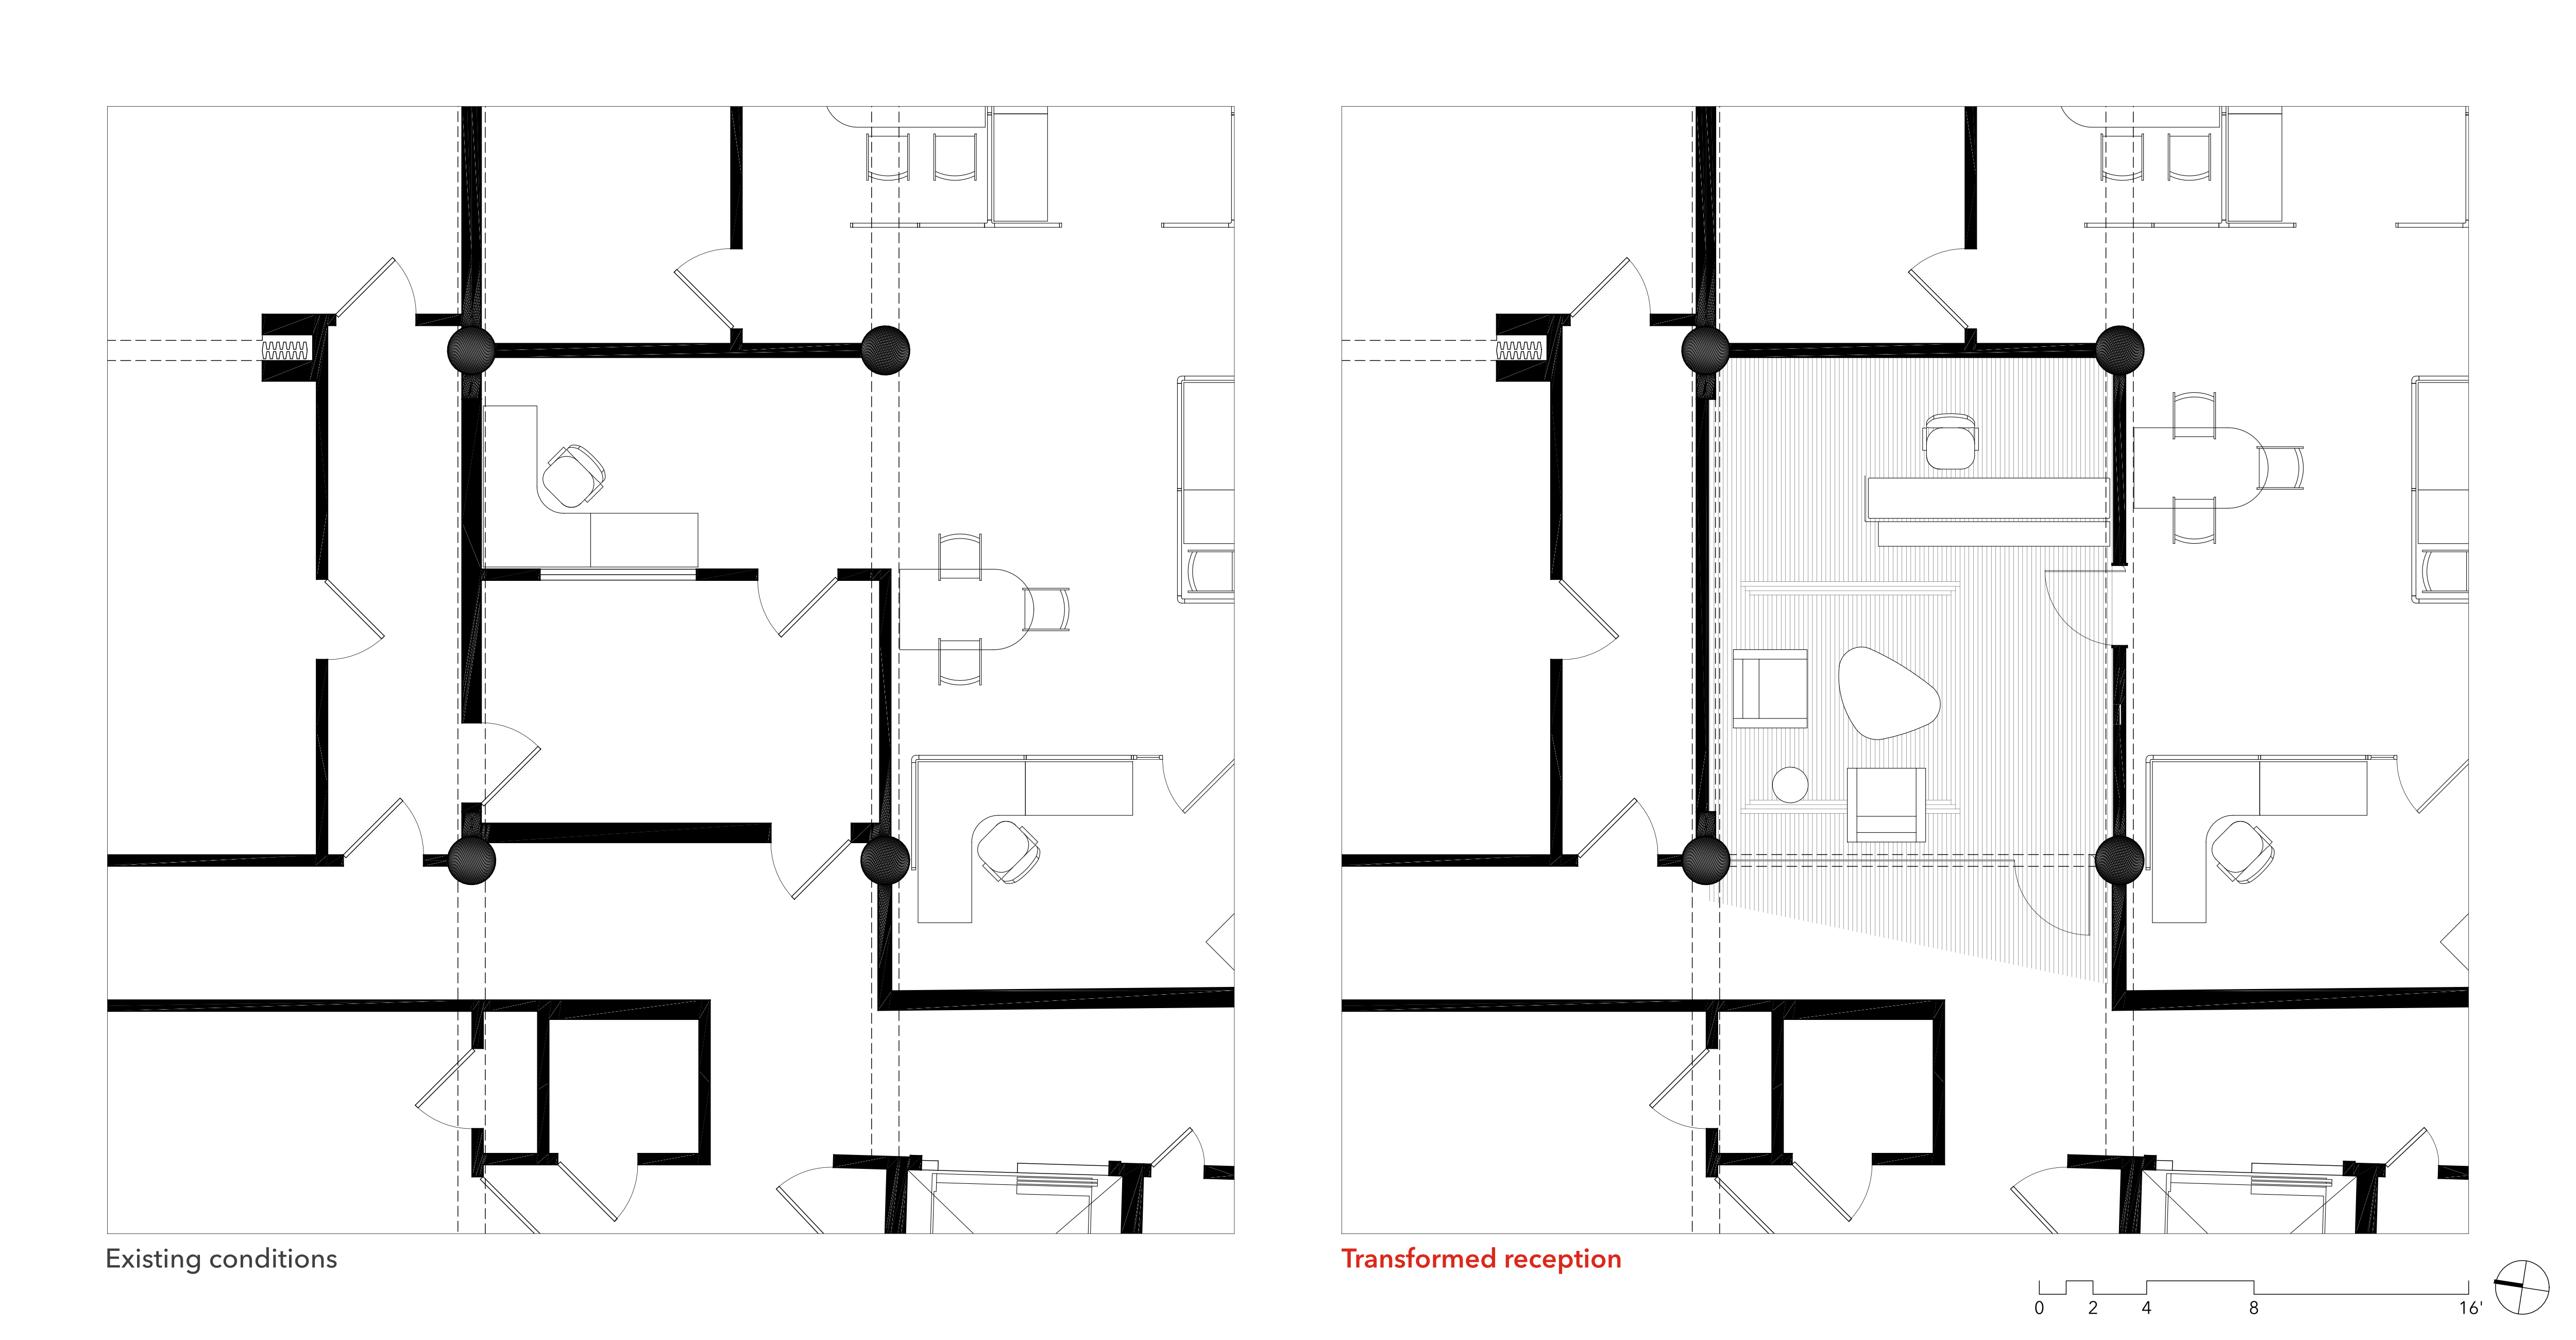 Before and after floor plans showing the transformation of the reception space